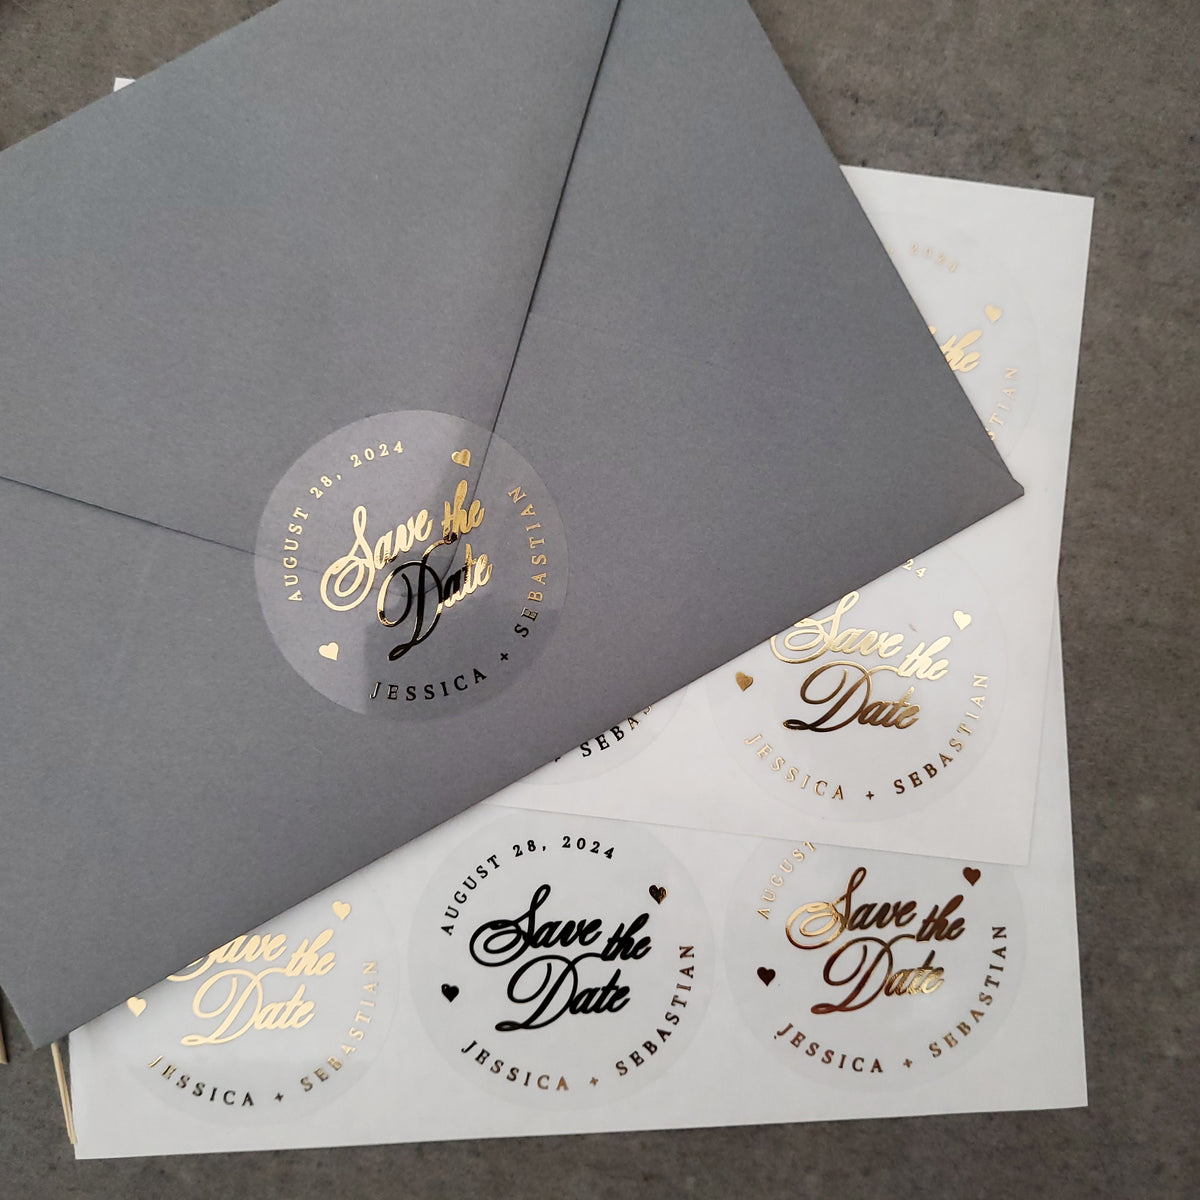 Gold foiled save the date envelope seal stickers